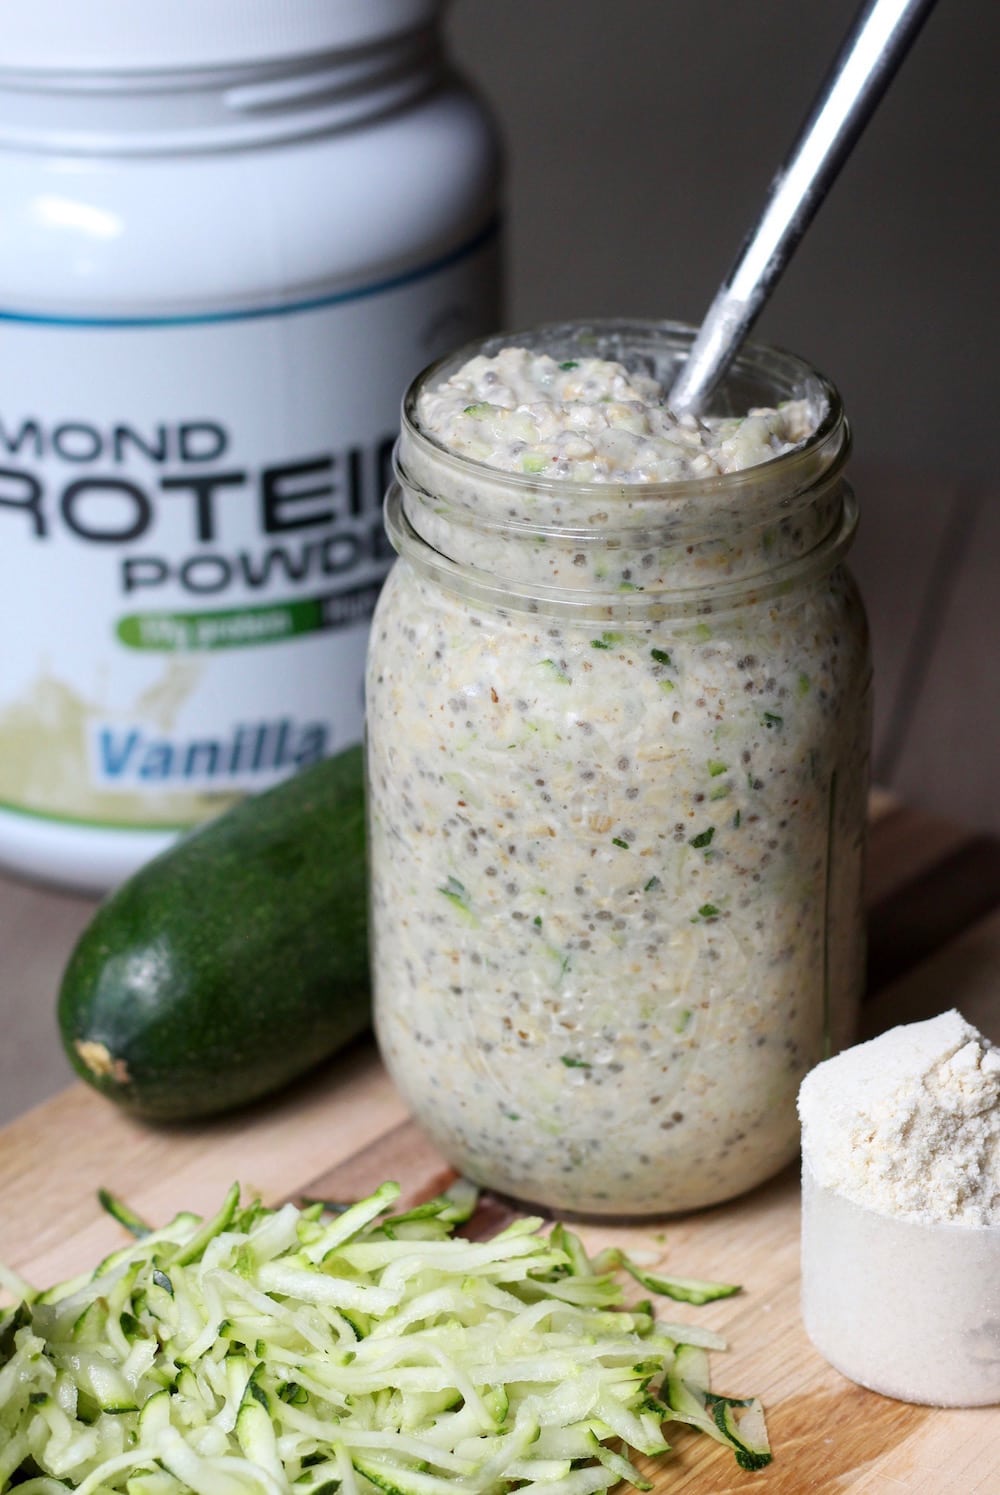 https://theconscientiouseater.com/wp-content/uploads/2018/06/Vanilla-Protein-Overnight-Oats-with-Zucchini.jpg